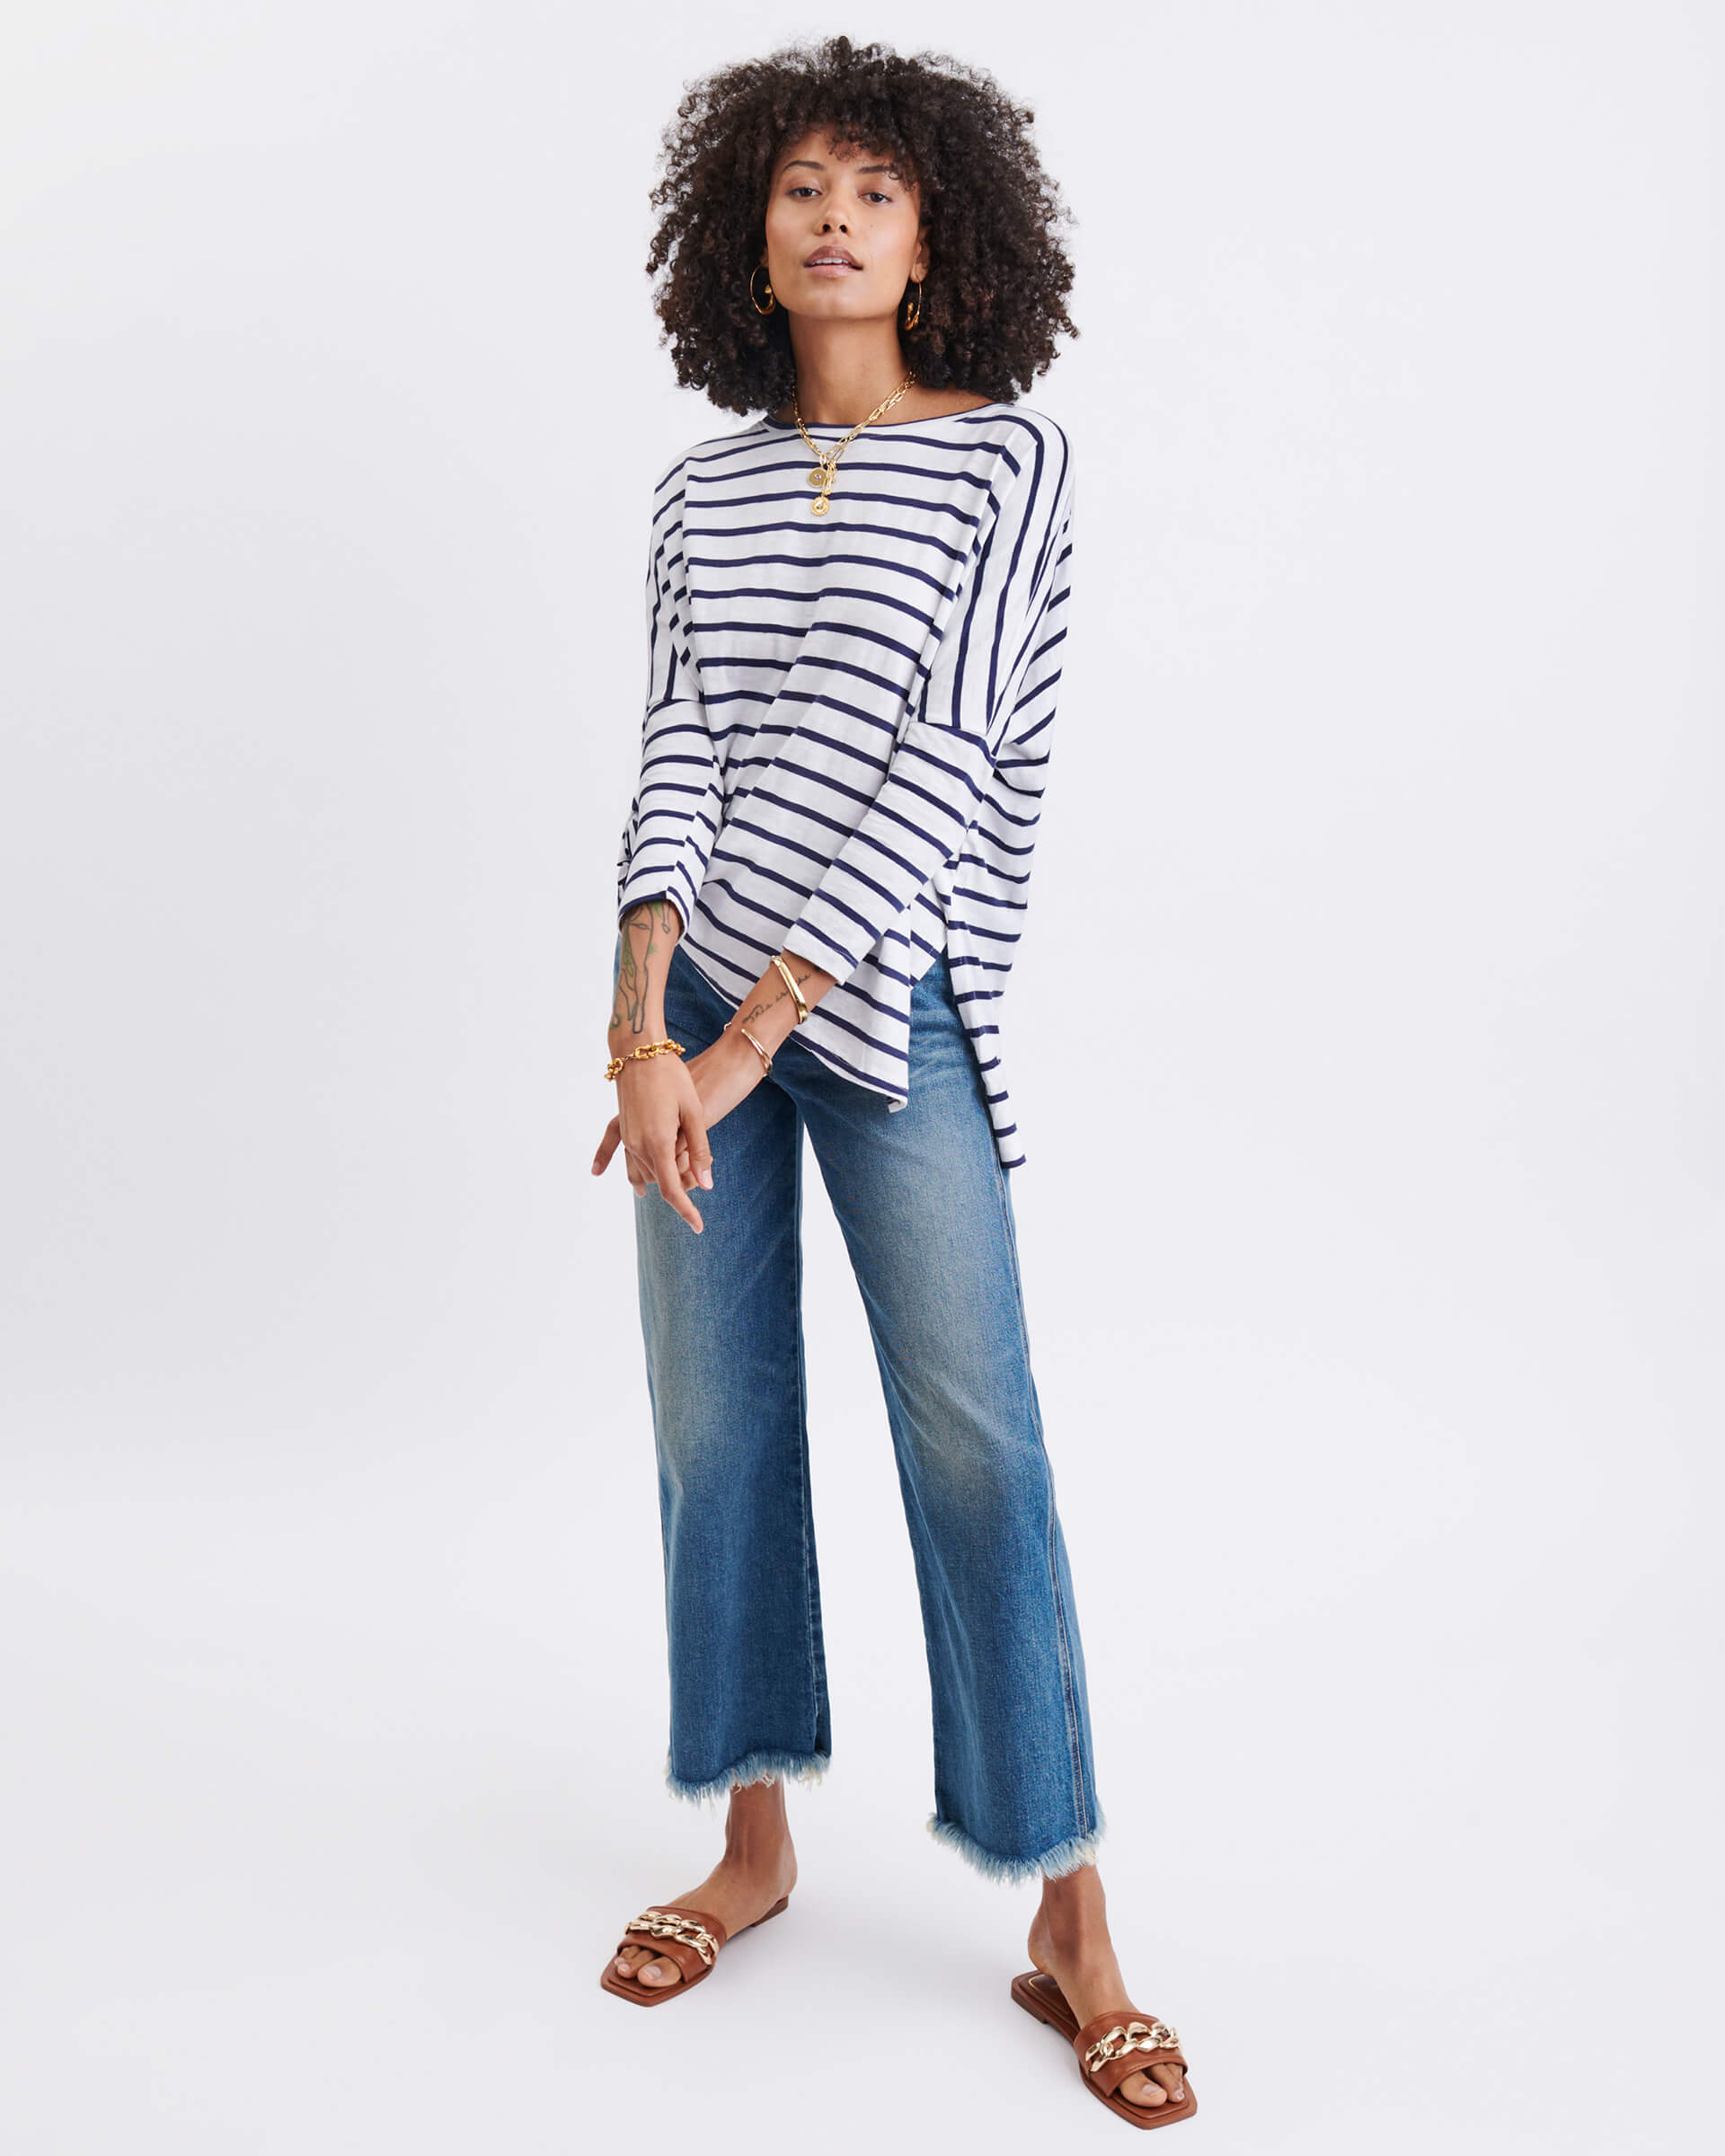 Women's One Size Tee in Navy Stripes Chest View Outfit